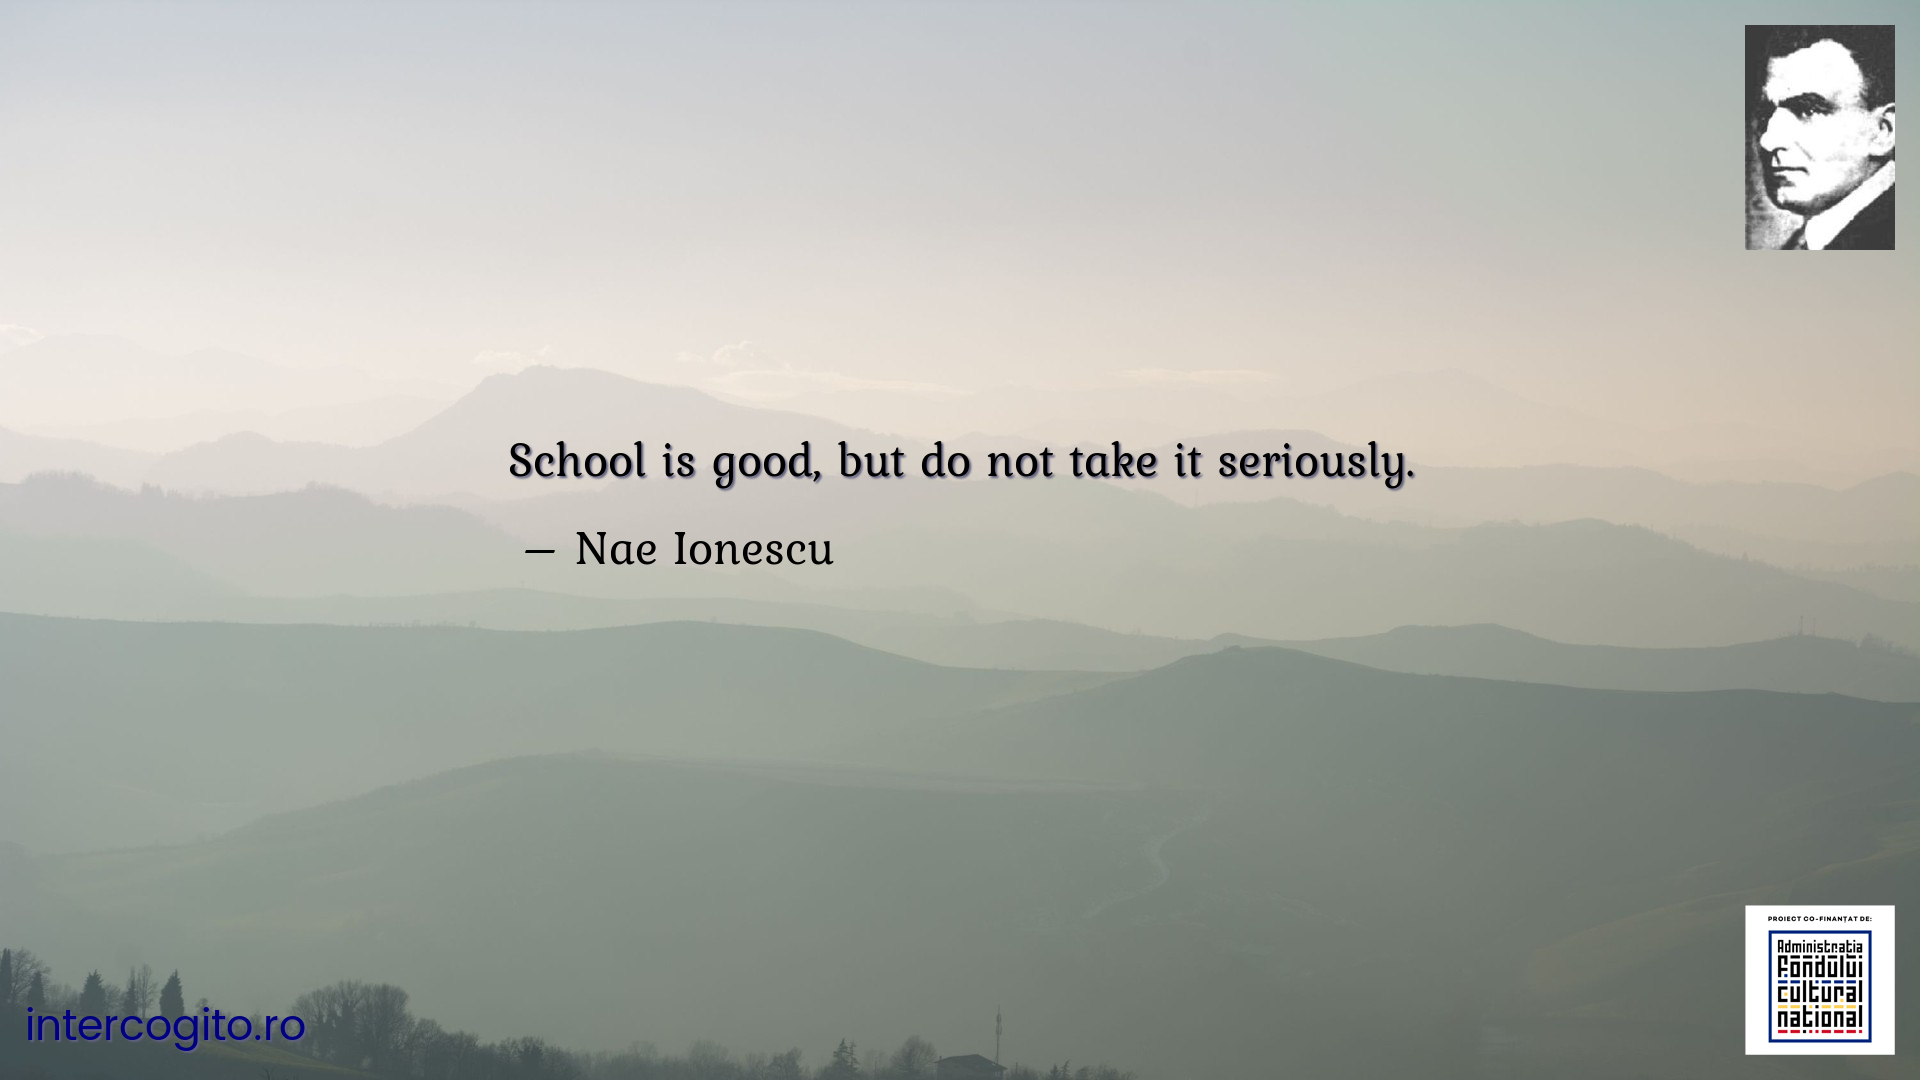 School is good, but do not take it seriously.